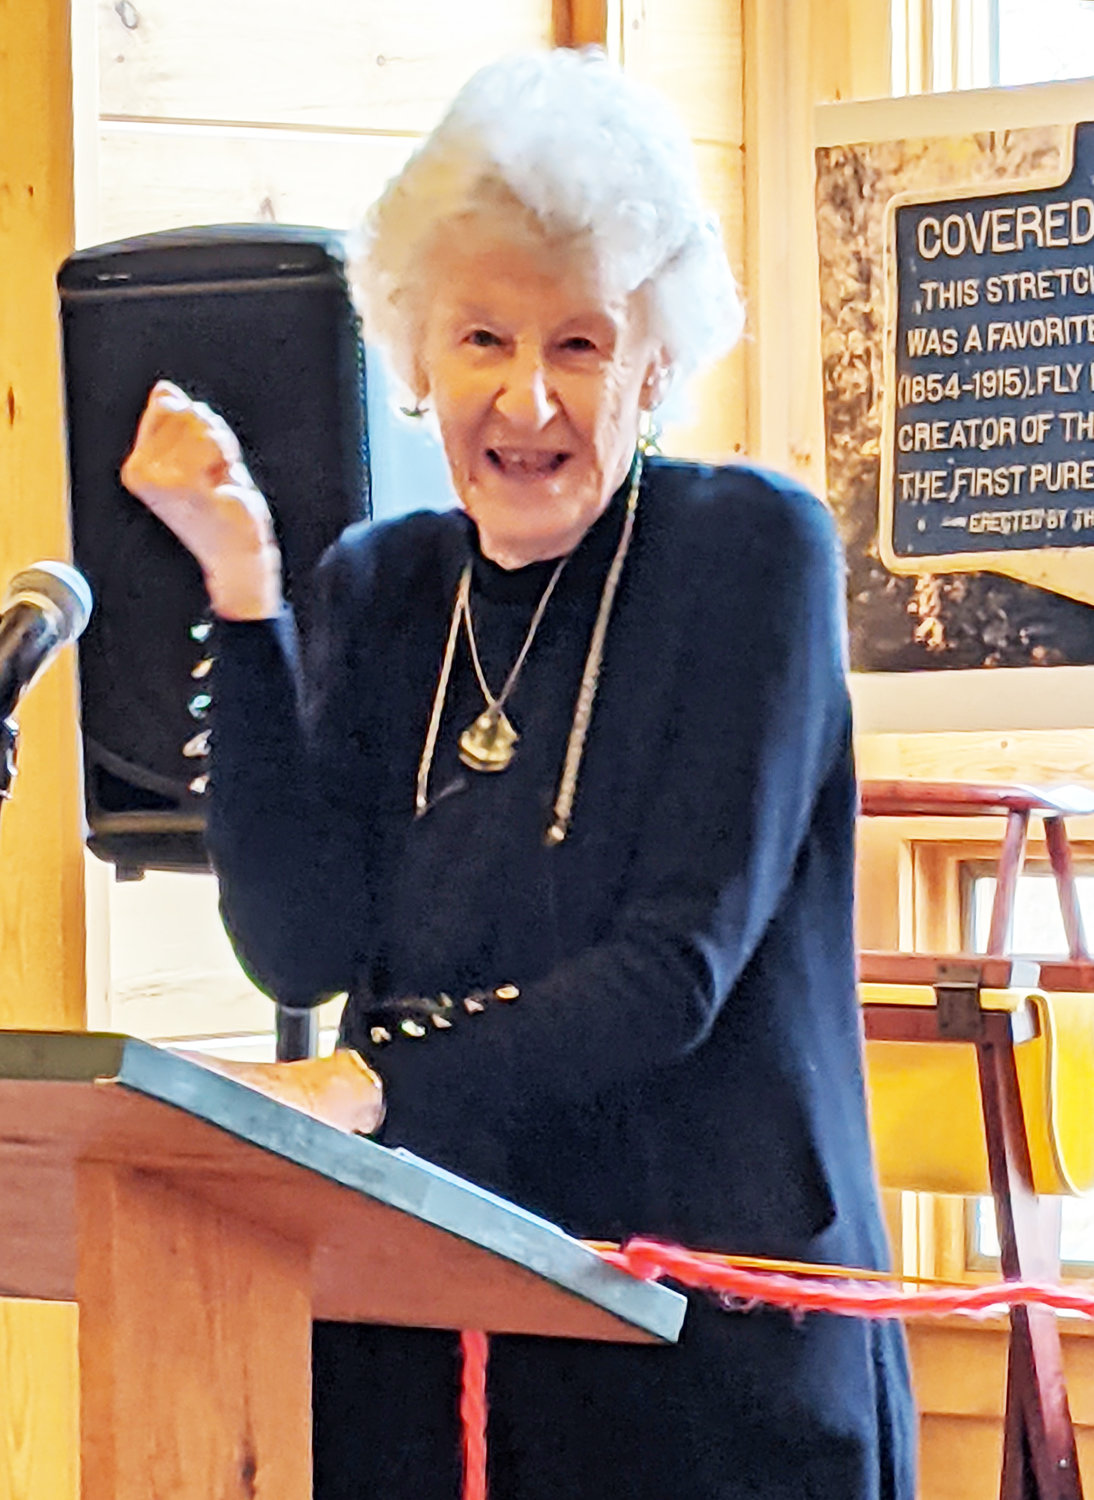 Joan Wulff sharies stories of her time with the 2021 Hall of Fame inductees at the Catskill Fly Fishing Center and Museum ceremony.